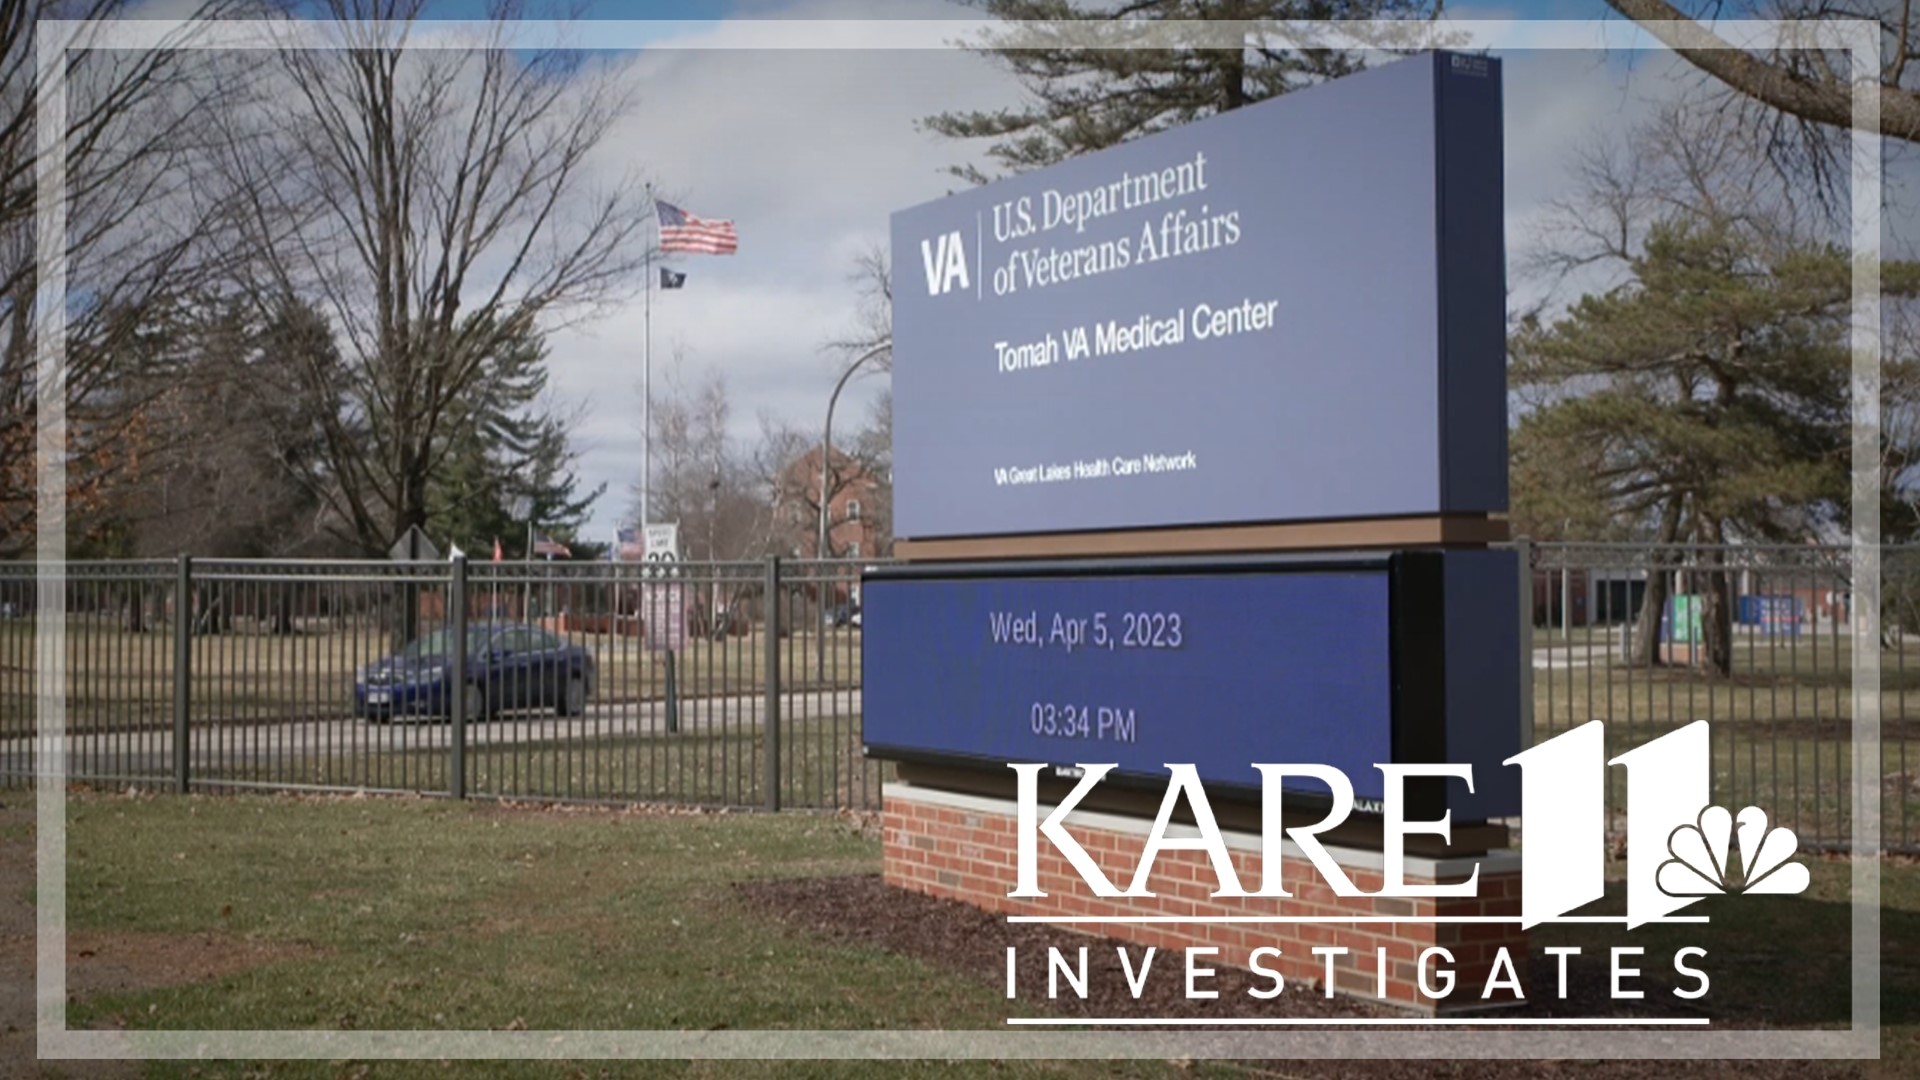 The VA apologizes and grants new exams to 649 veterans after KARE 11 exposed how a doctor at the Tomah VA repeatedly misdiagnosed patients.